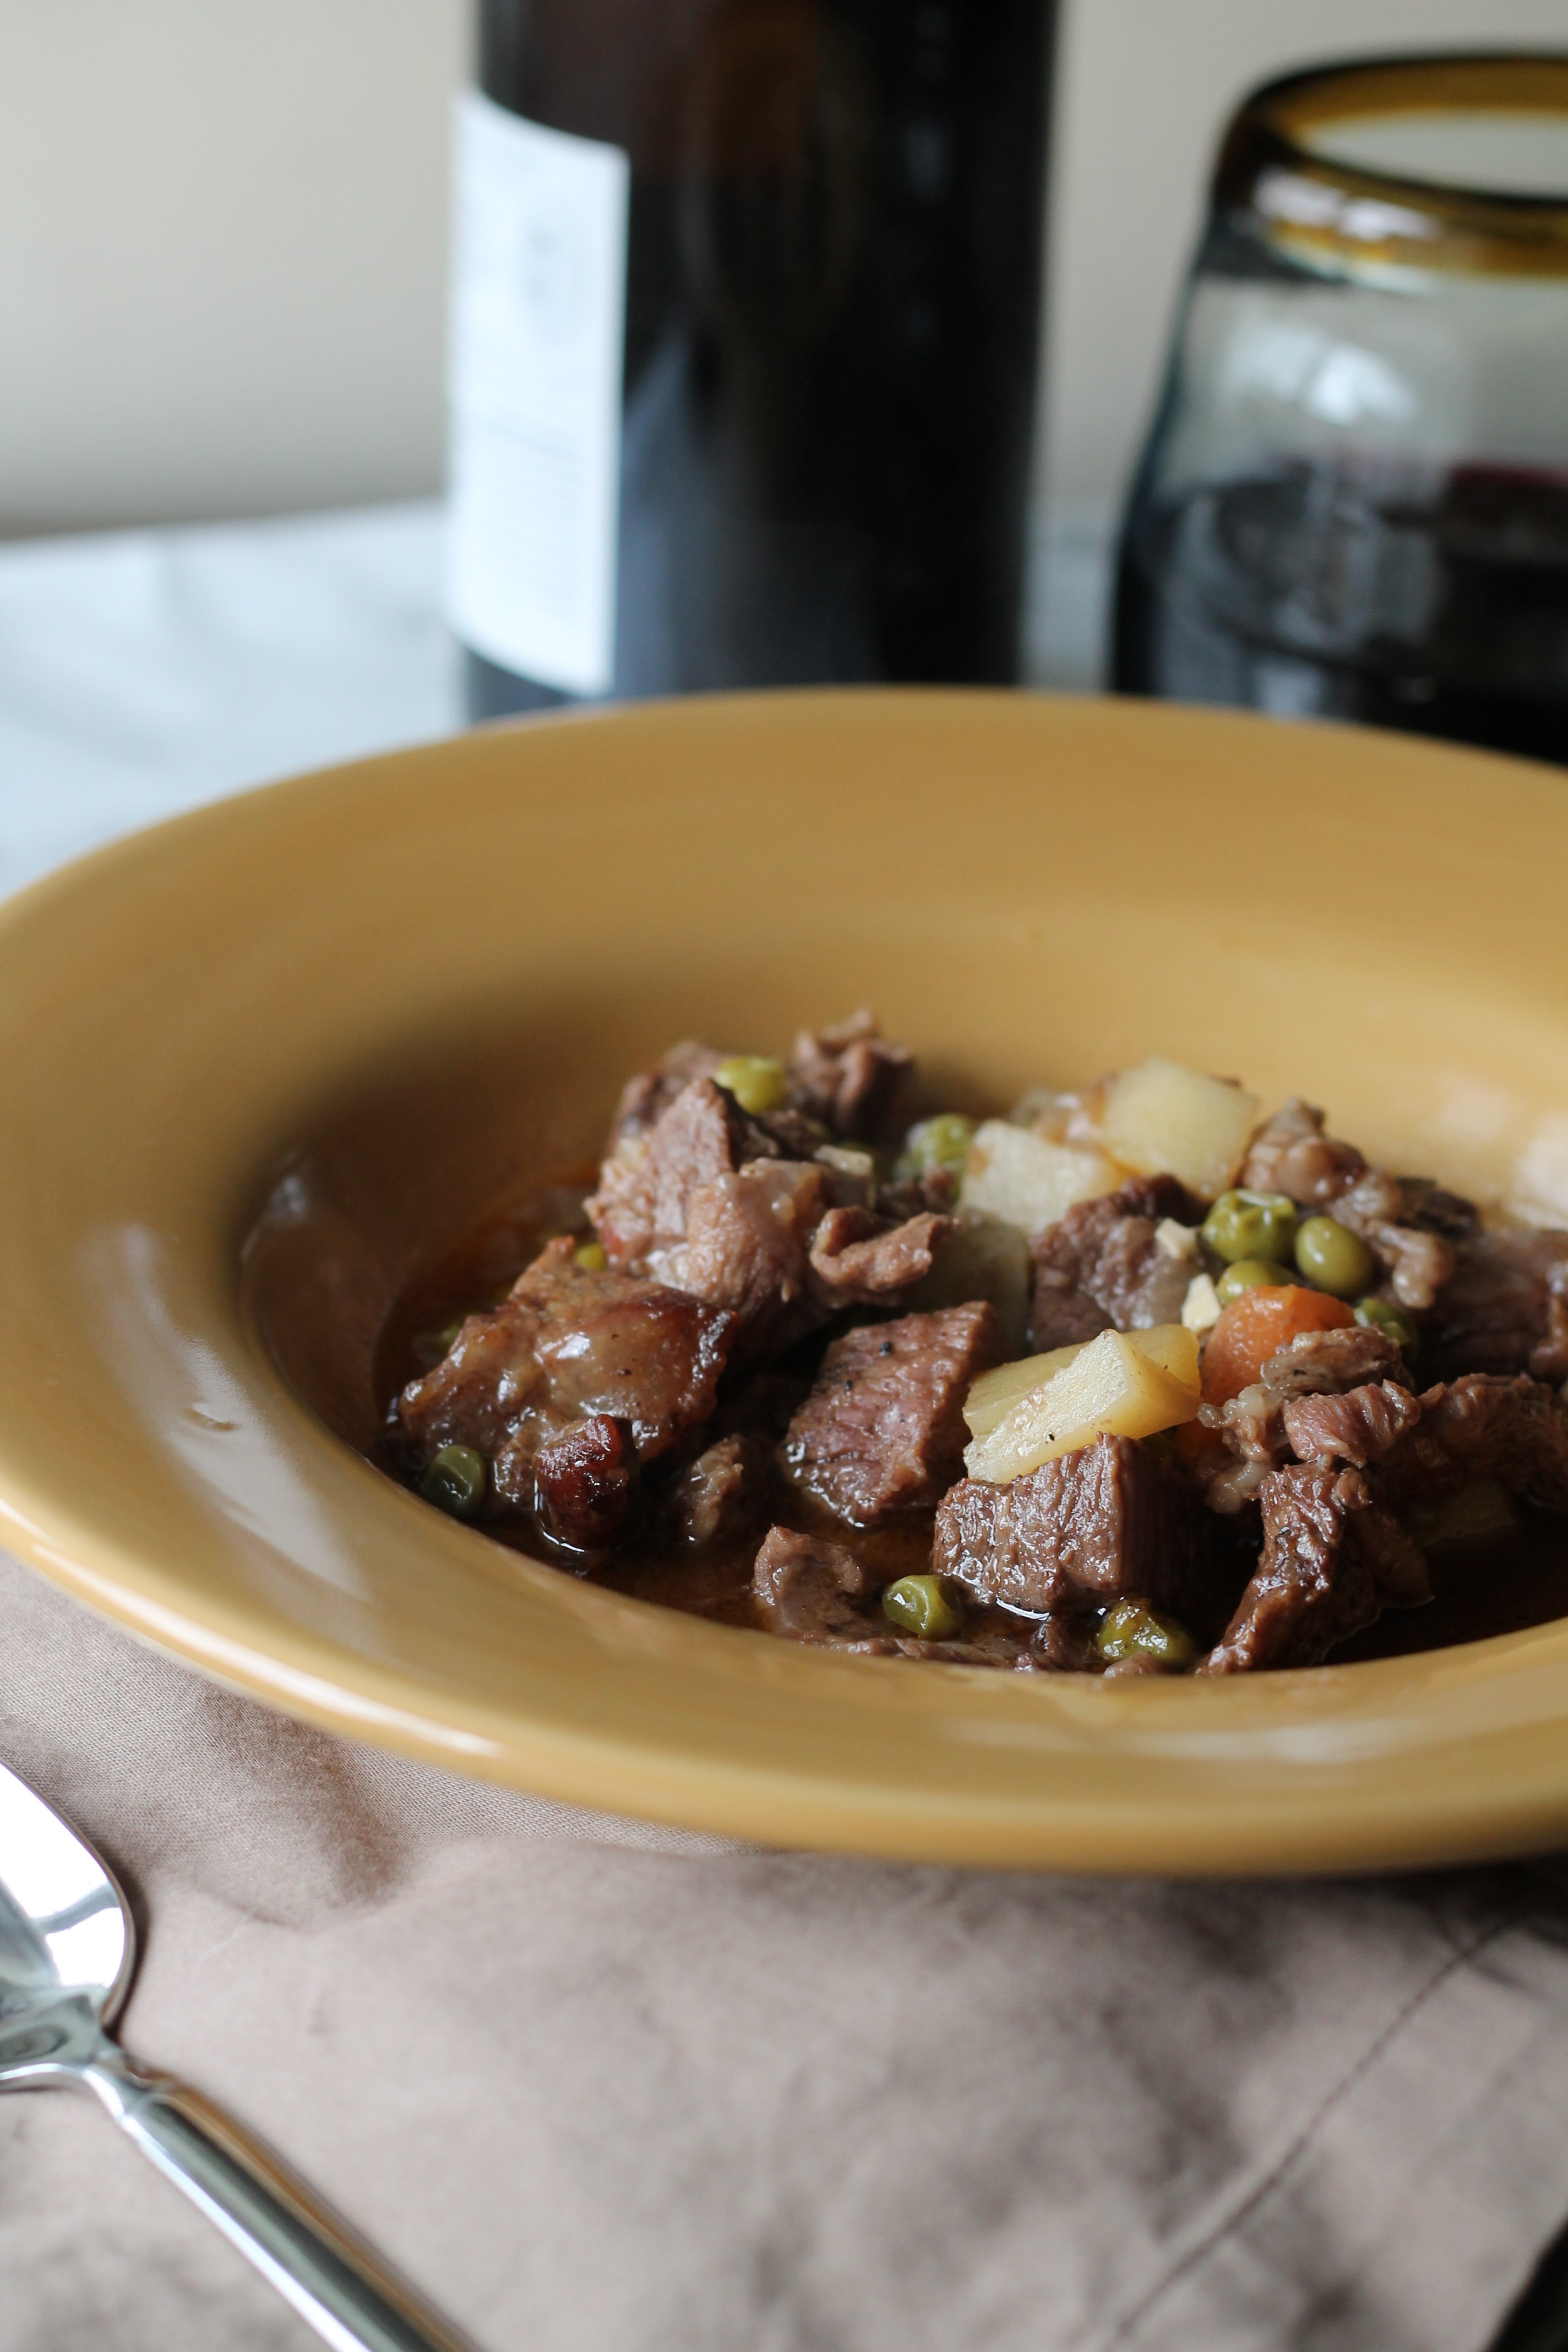 No better way to warm up this fall than with this Beef Stew. It's full of tender meat, carrots, peas and potatoes.